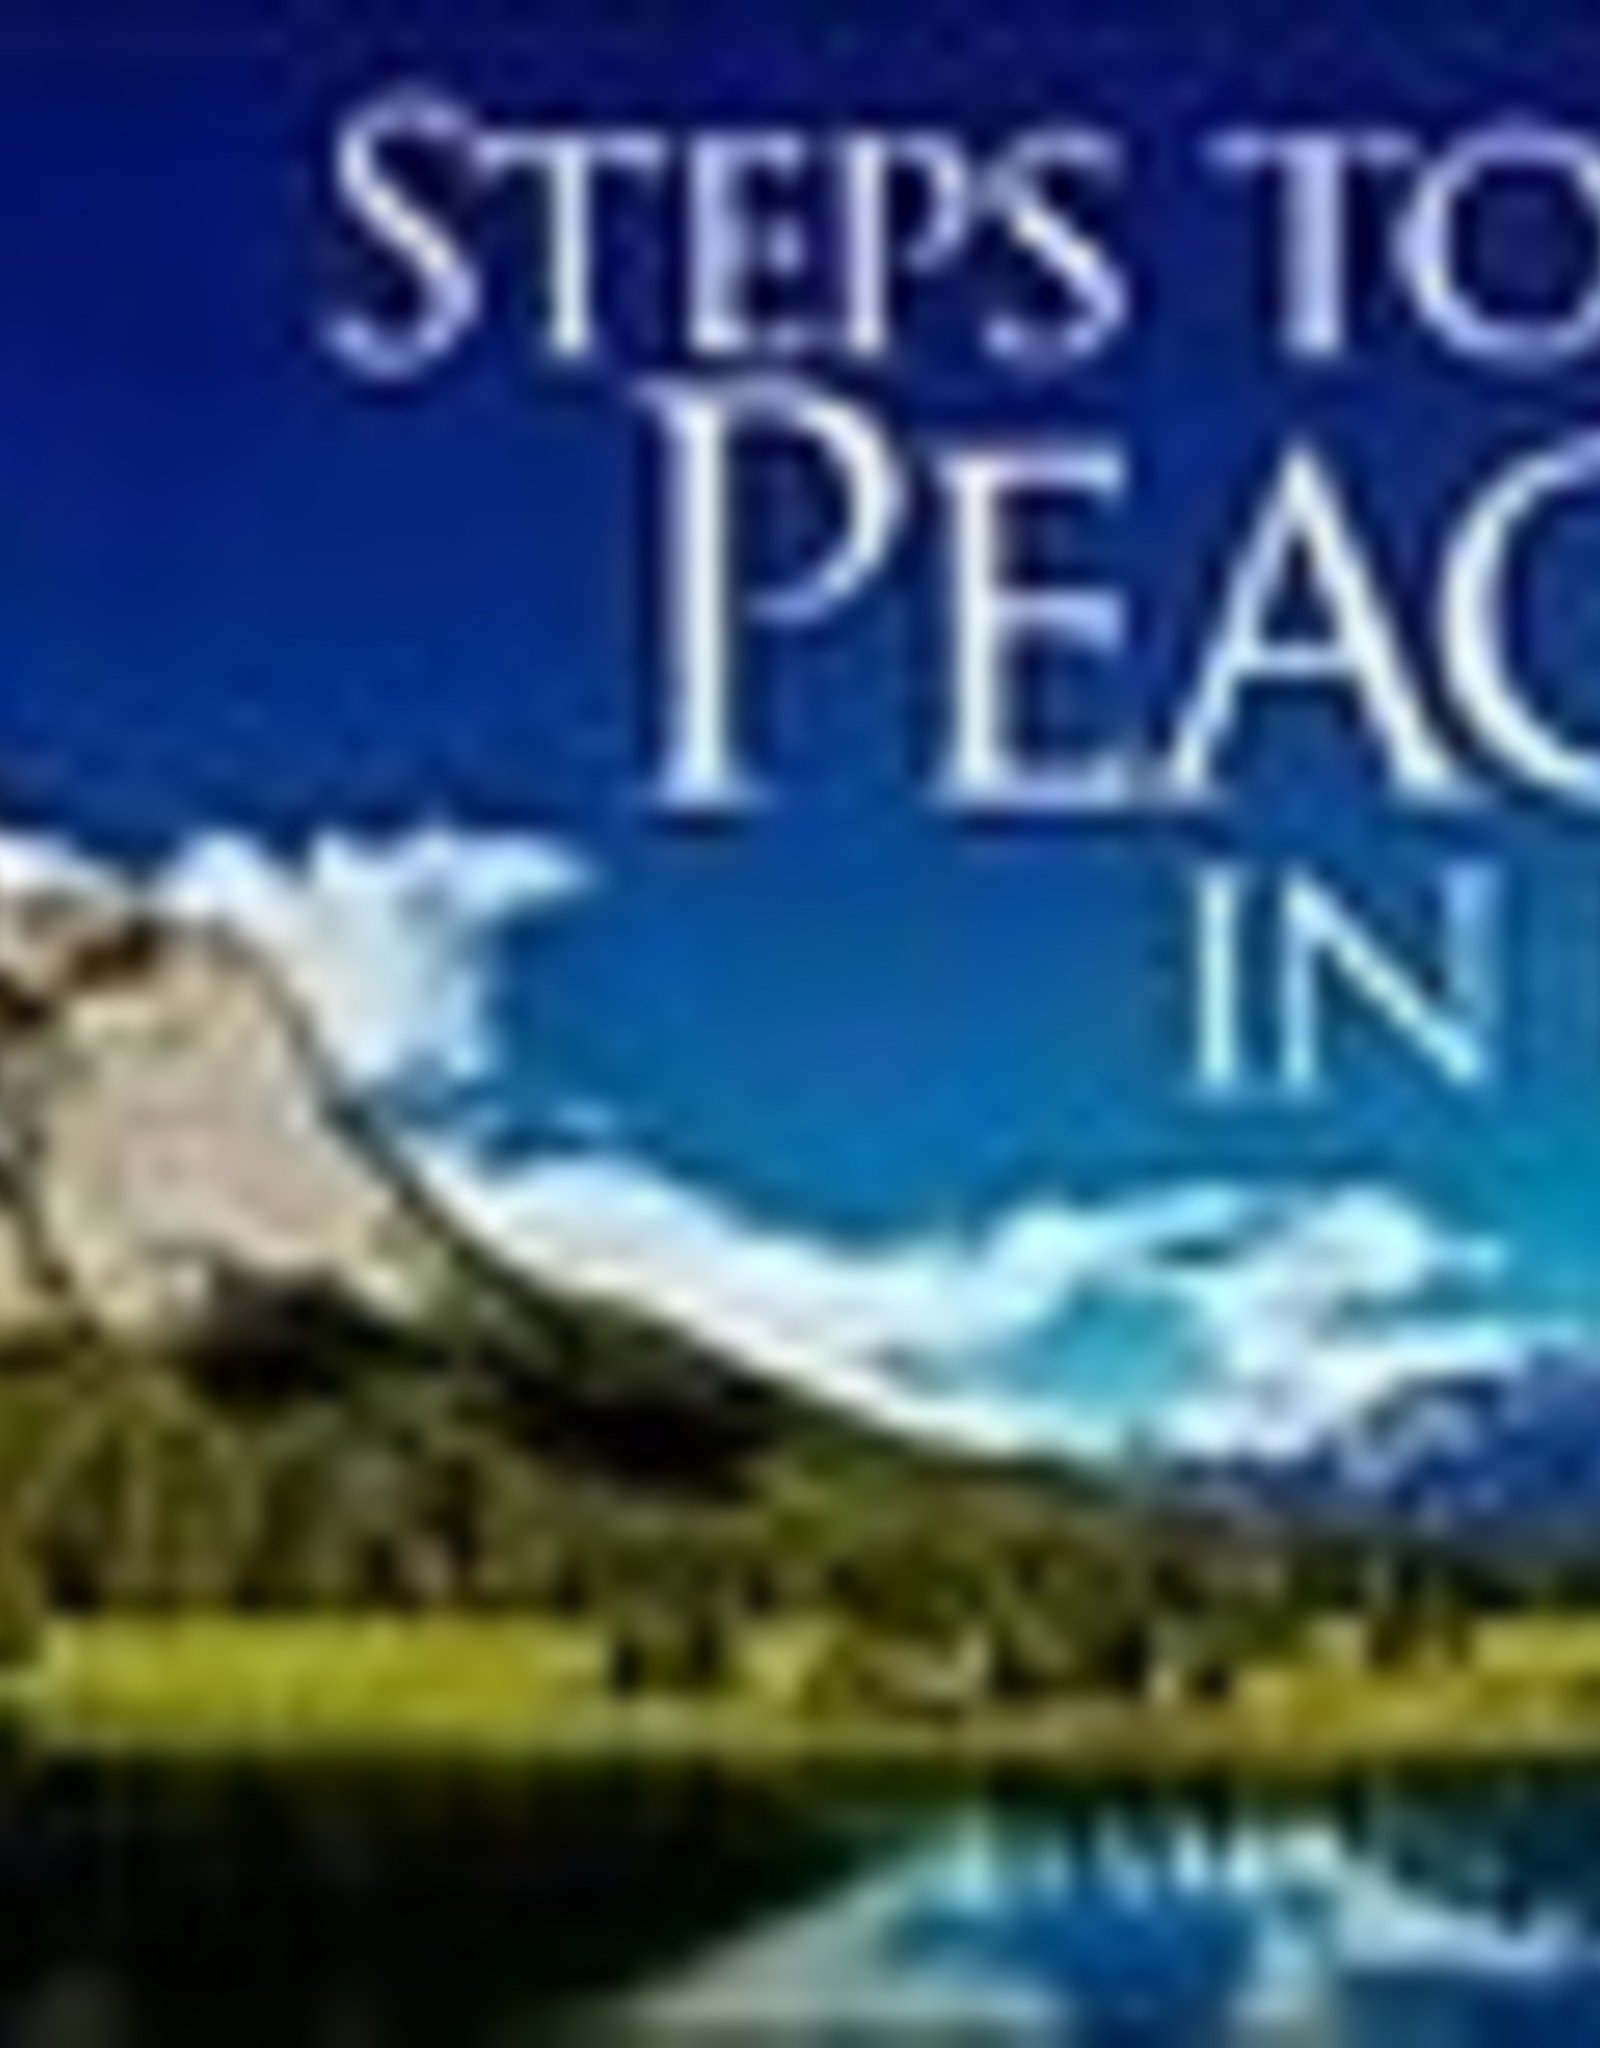 Discover Steps to Peace in Life